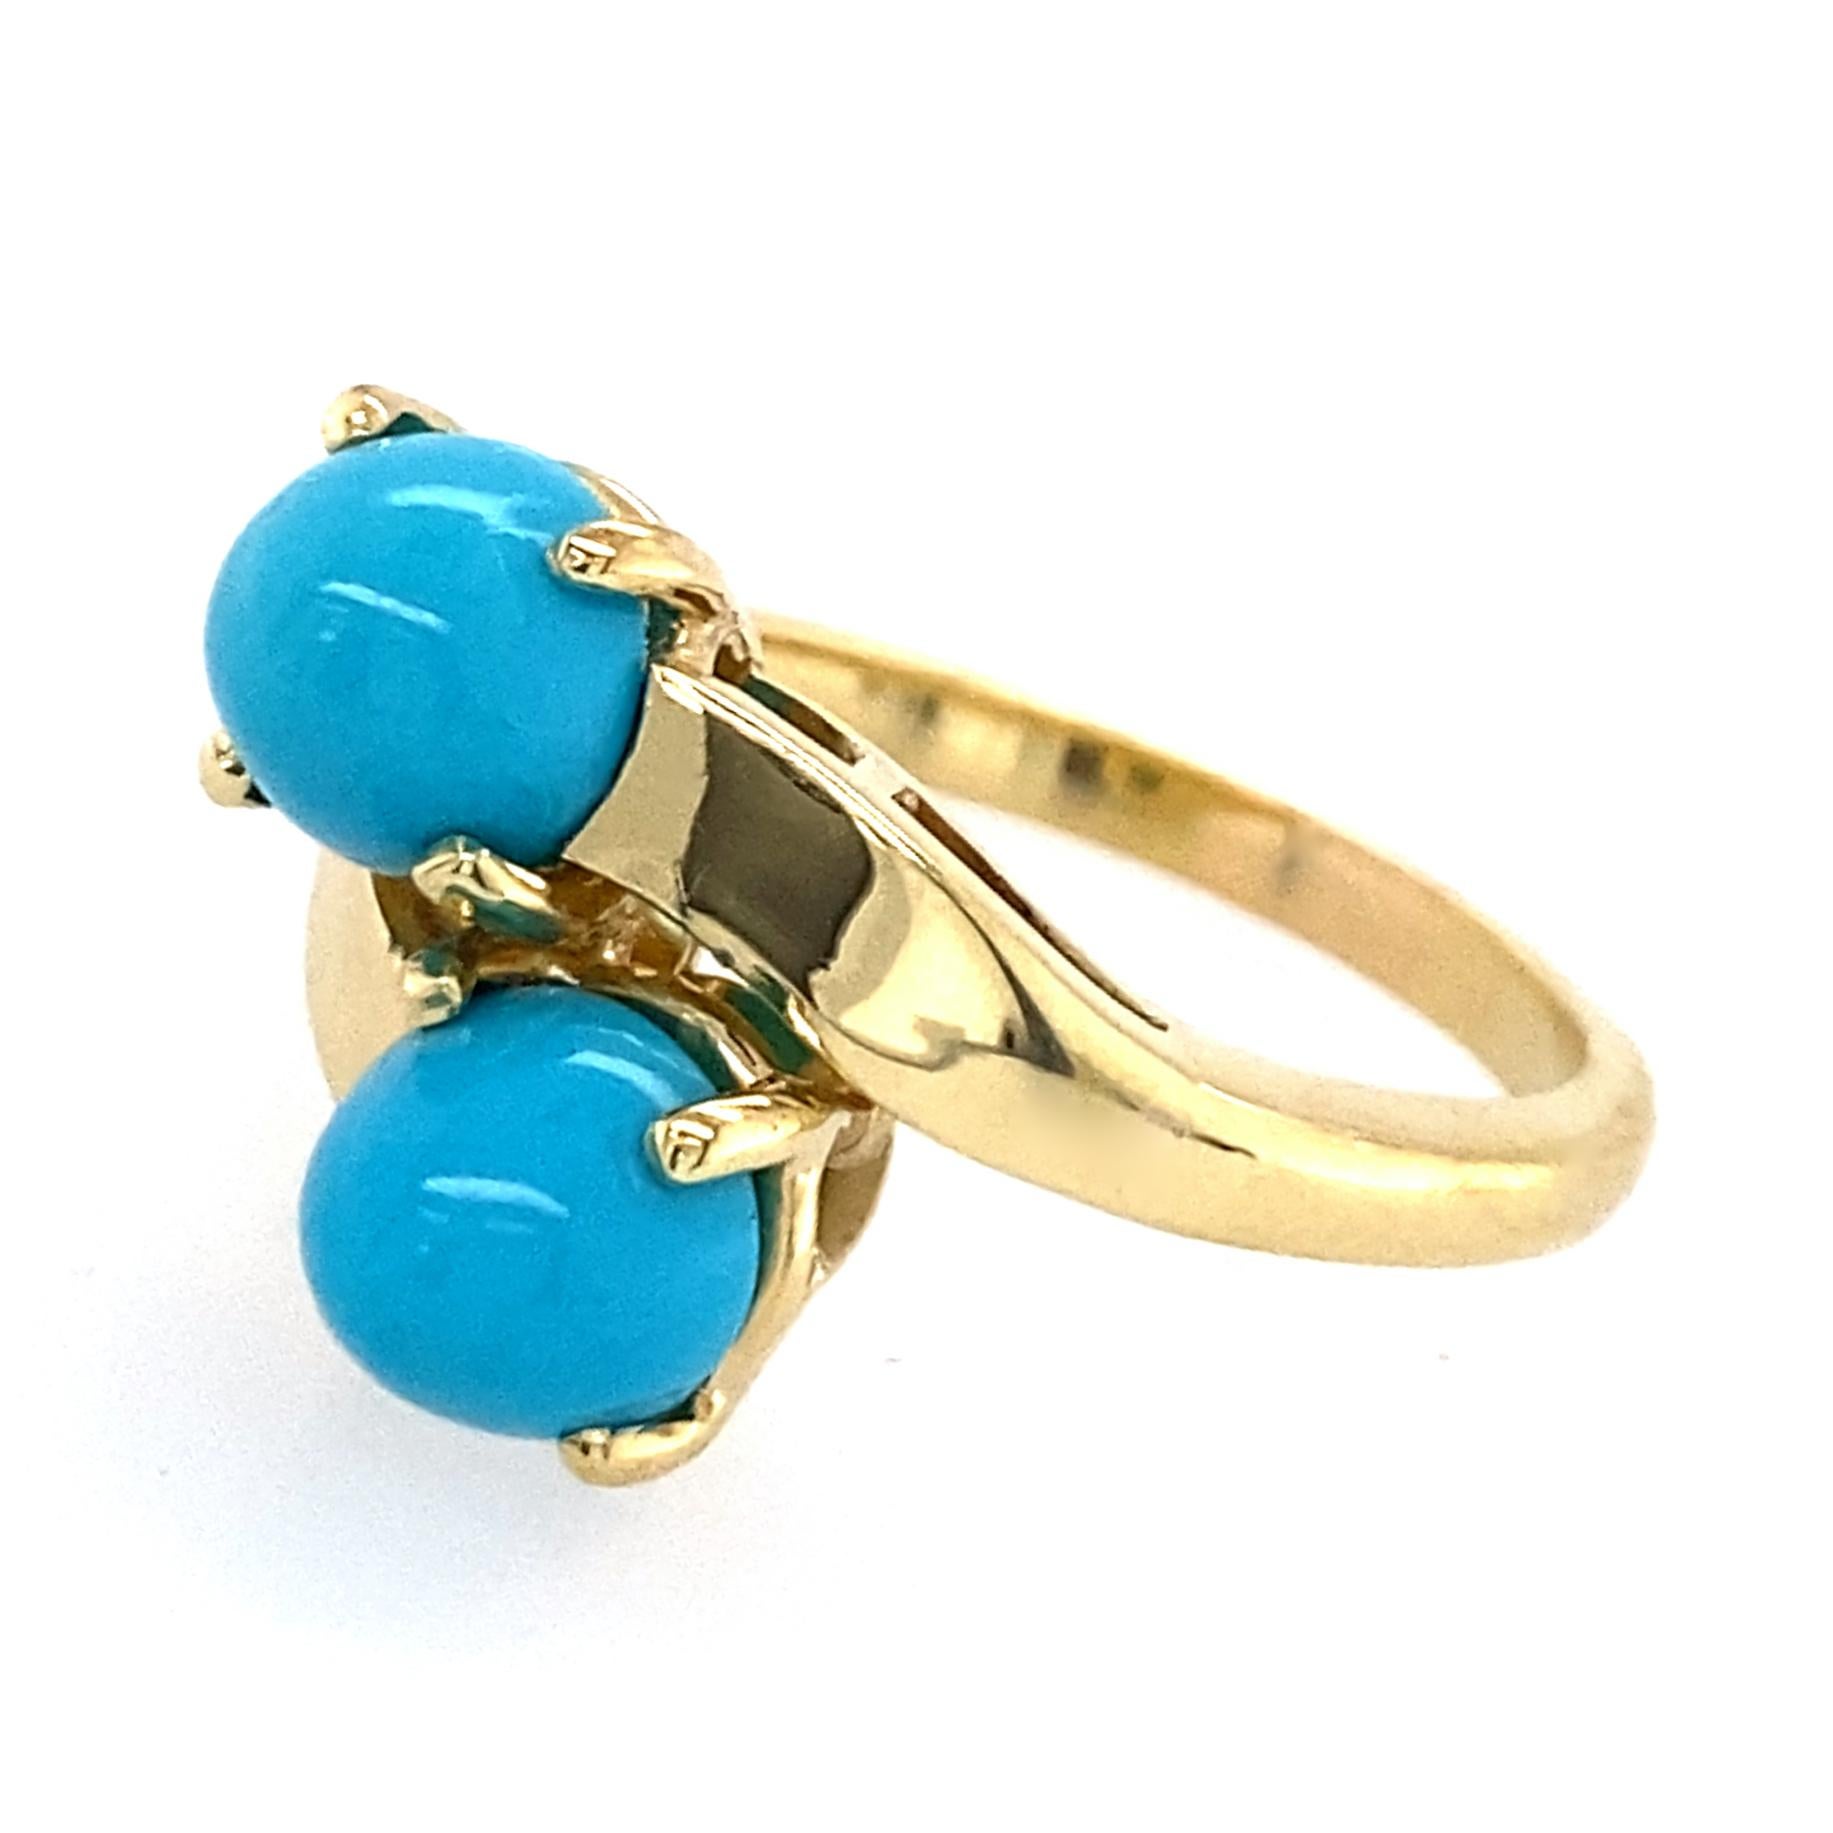 This ring spent most of its career as an excruciatingly boring pearl bypass ring.  We breathed new life into it by replacing the pearls with two gorgeous, chewy little bullet cabochons of turquoise from the famed Sleeping Beauty mine in Globe,